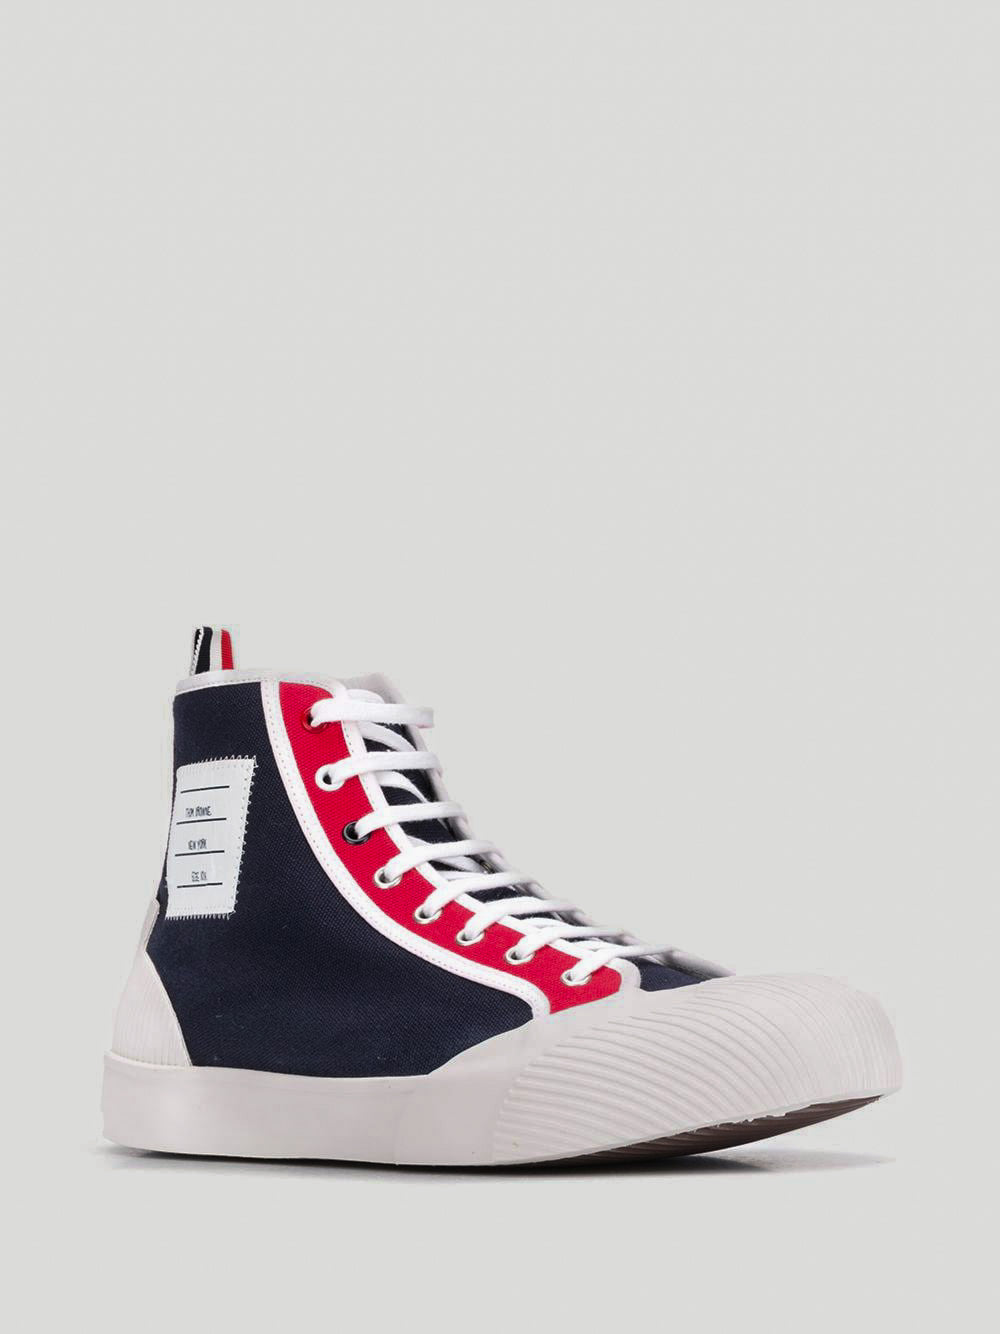 Thom Browne Contrast-Panel High-Top Sneakers (Size 38.5)